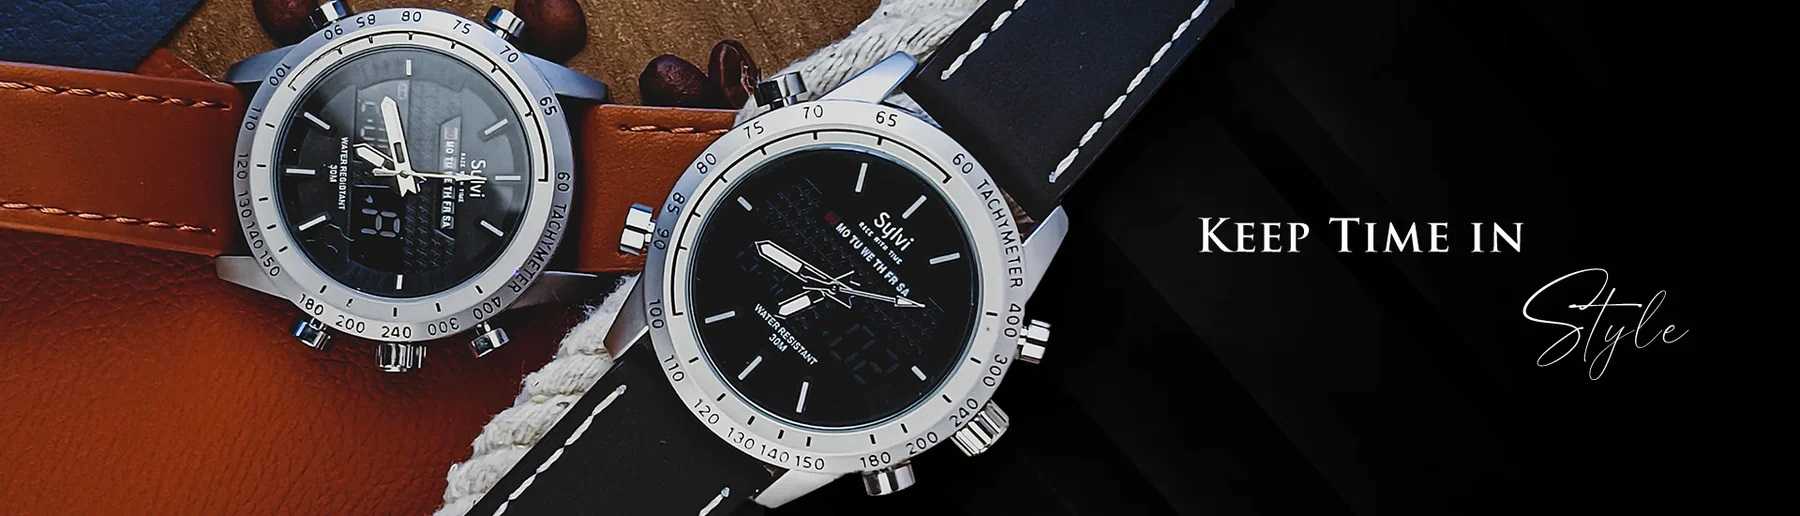 Shop Perfect Watches Online For Men